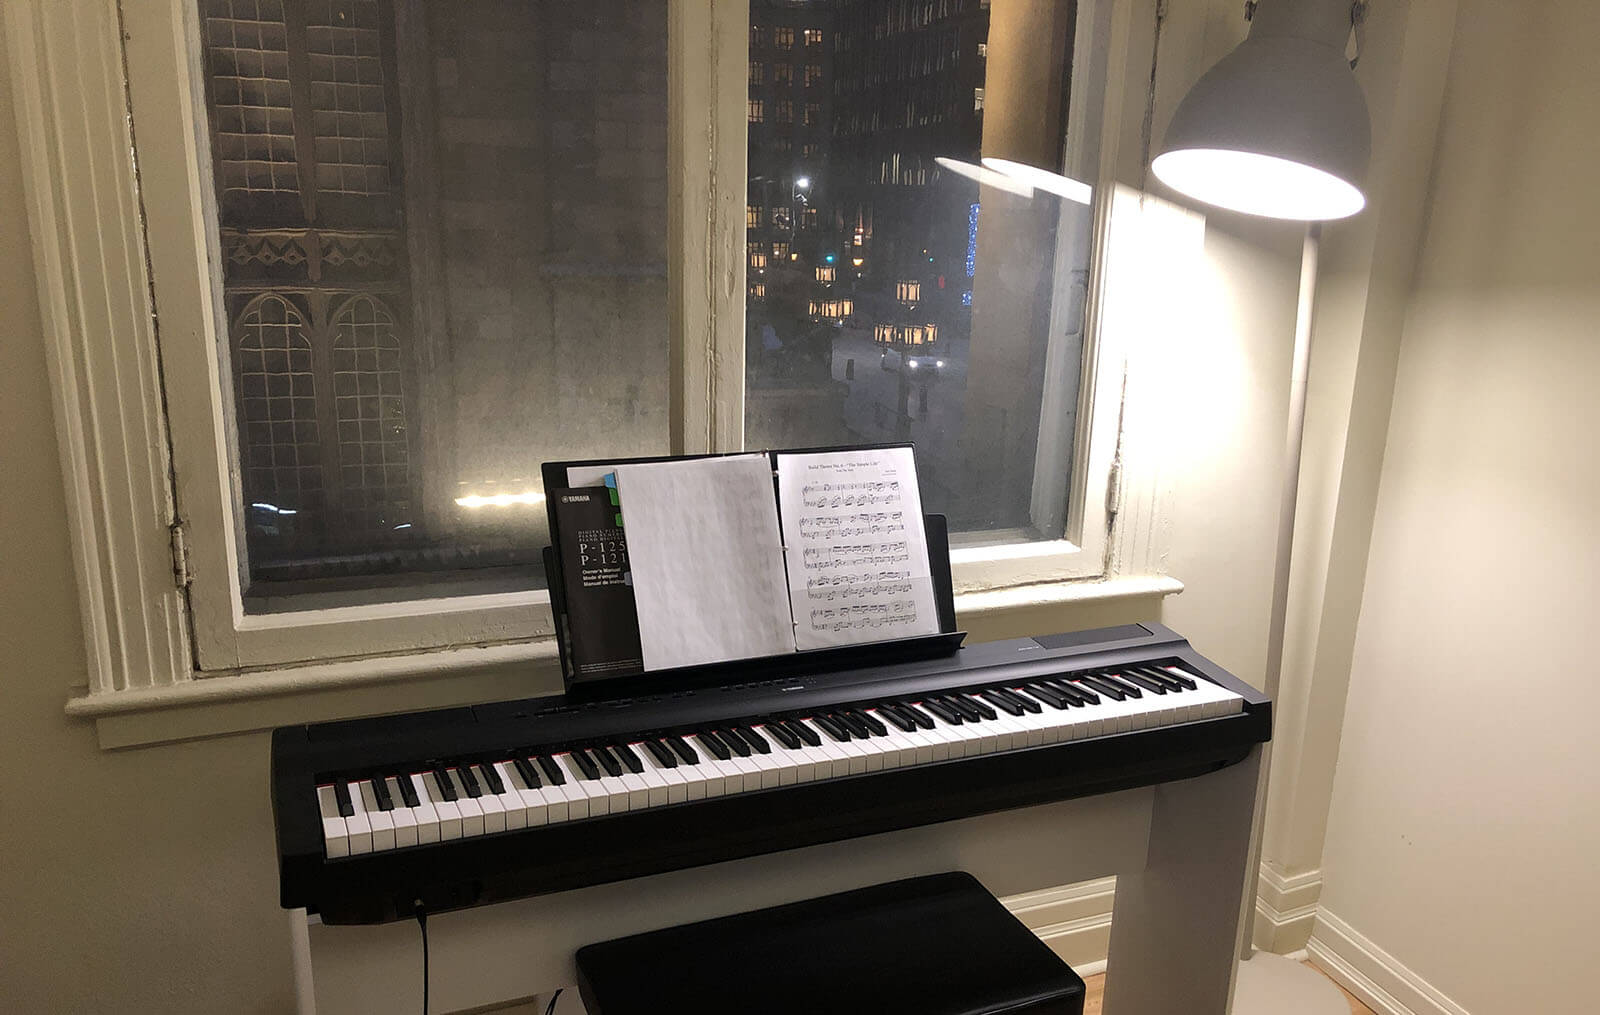 A piano in front of a window